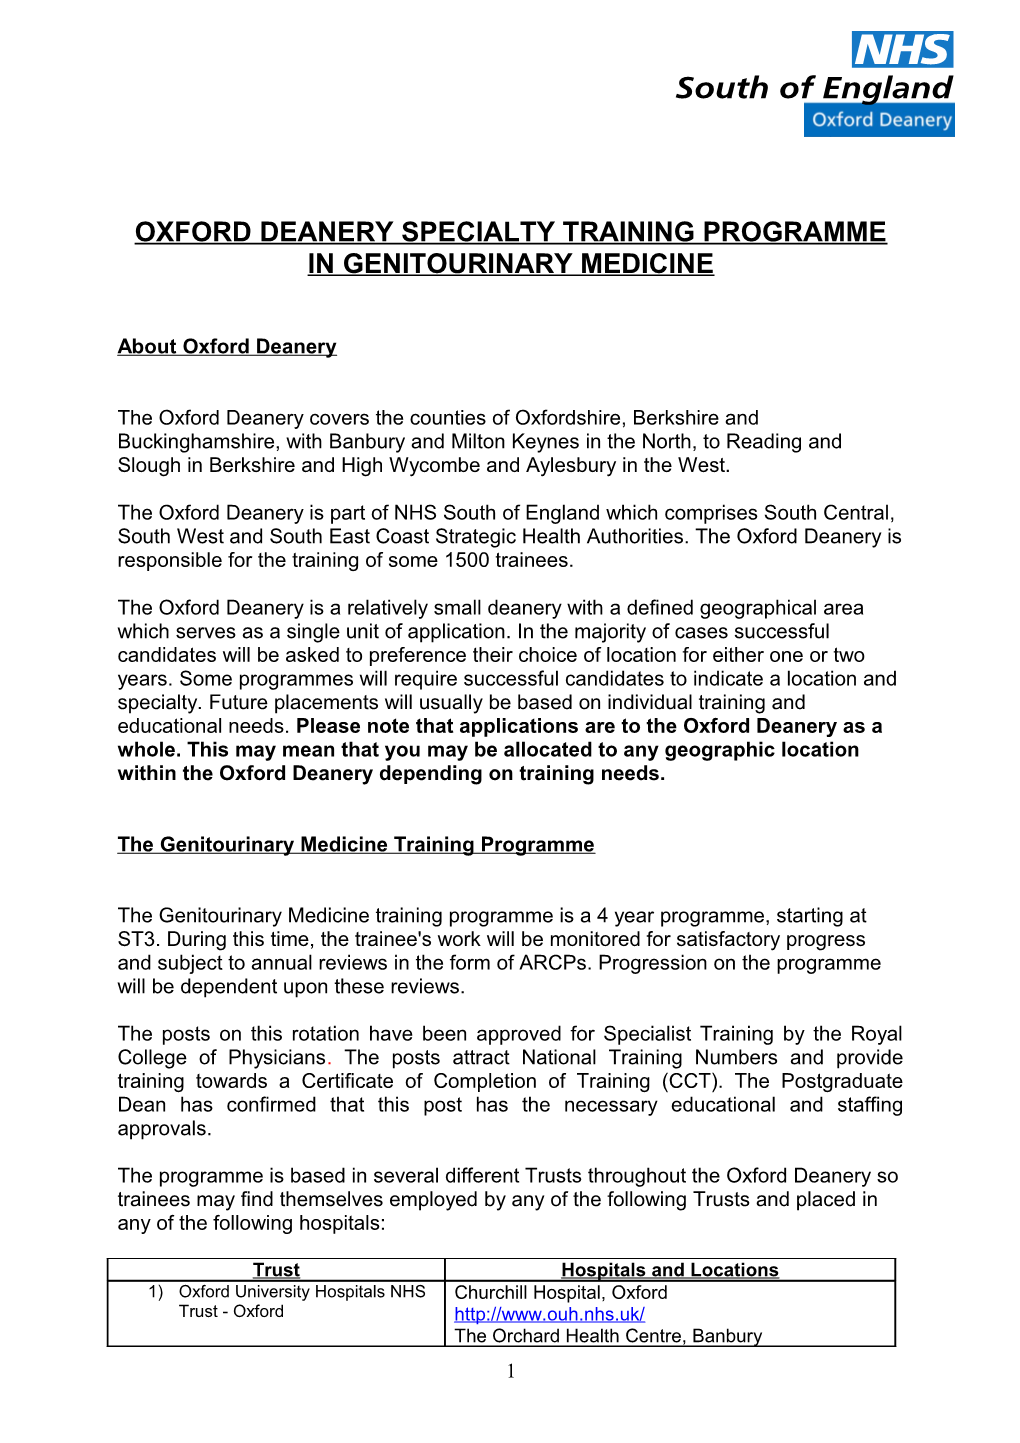 Oxford Deanery Specialty Training Programme in Genitourinary Medicine